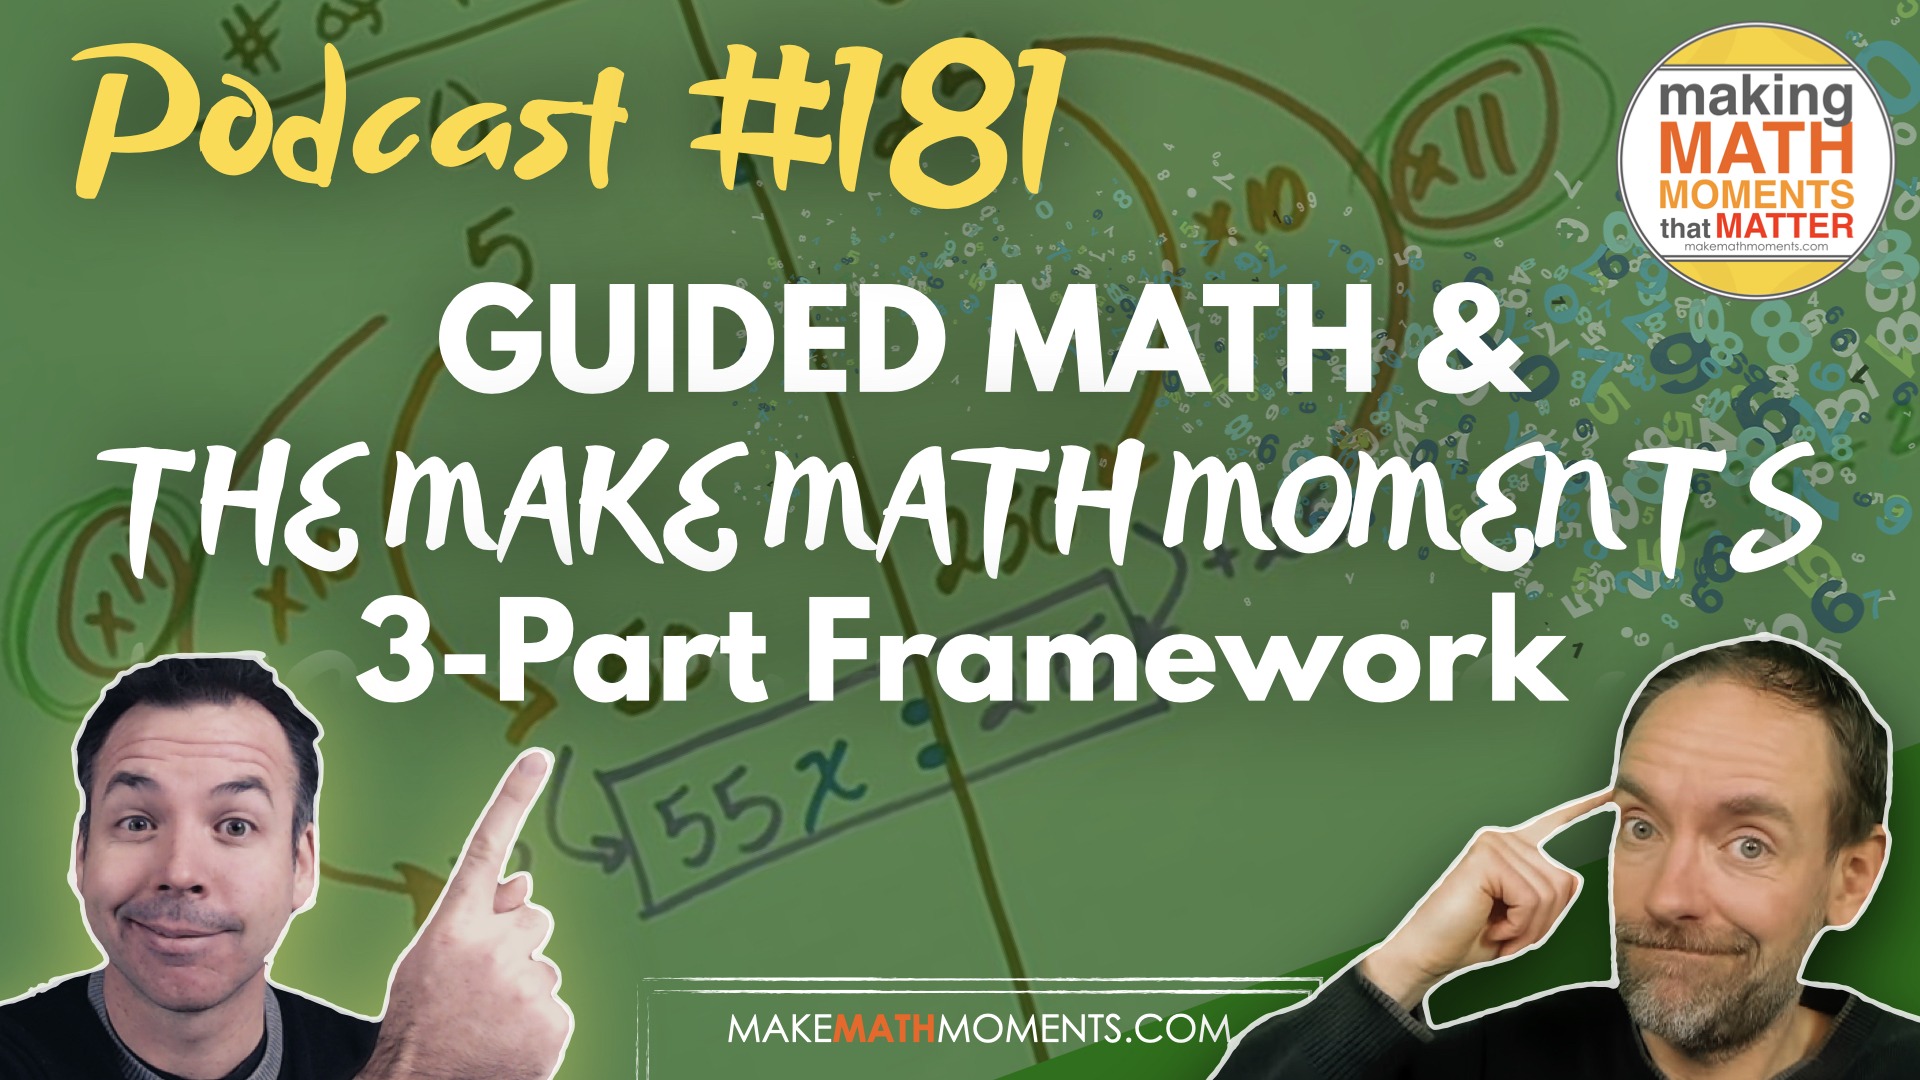 Episode 181: Guided Math & The Make Math Moments 3-Part Framework – An Interview with Christine Michalyshen